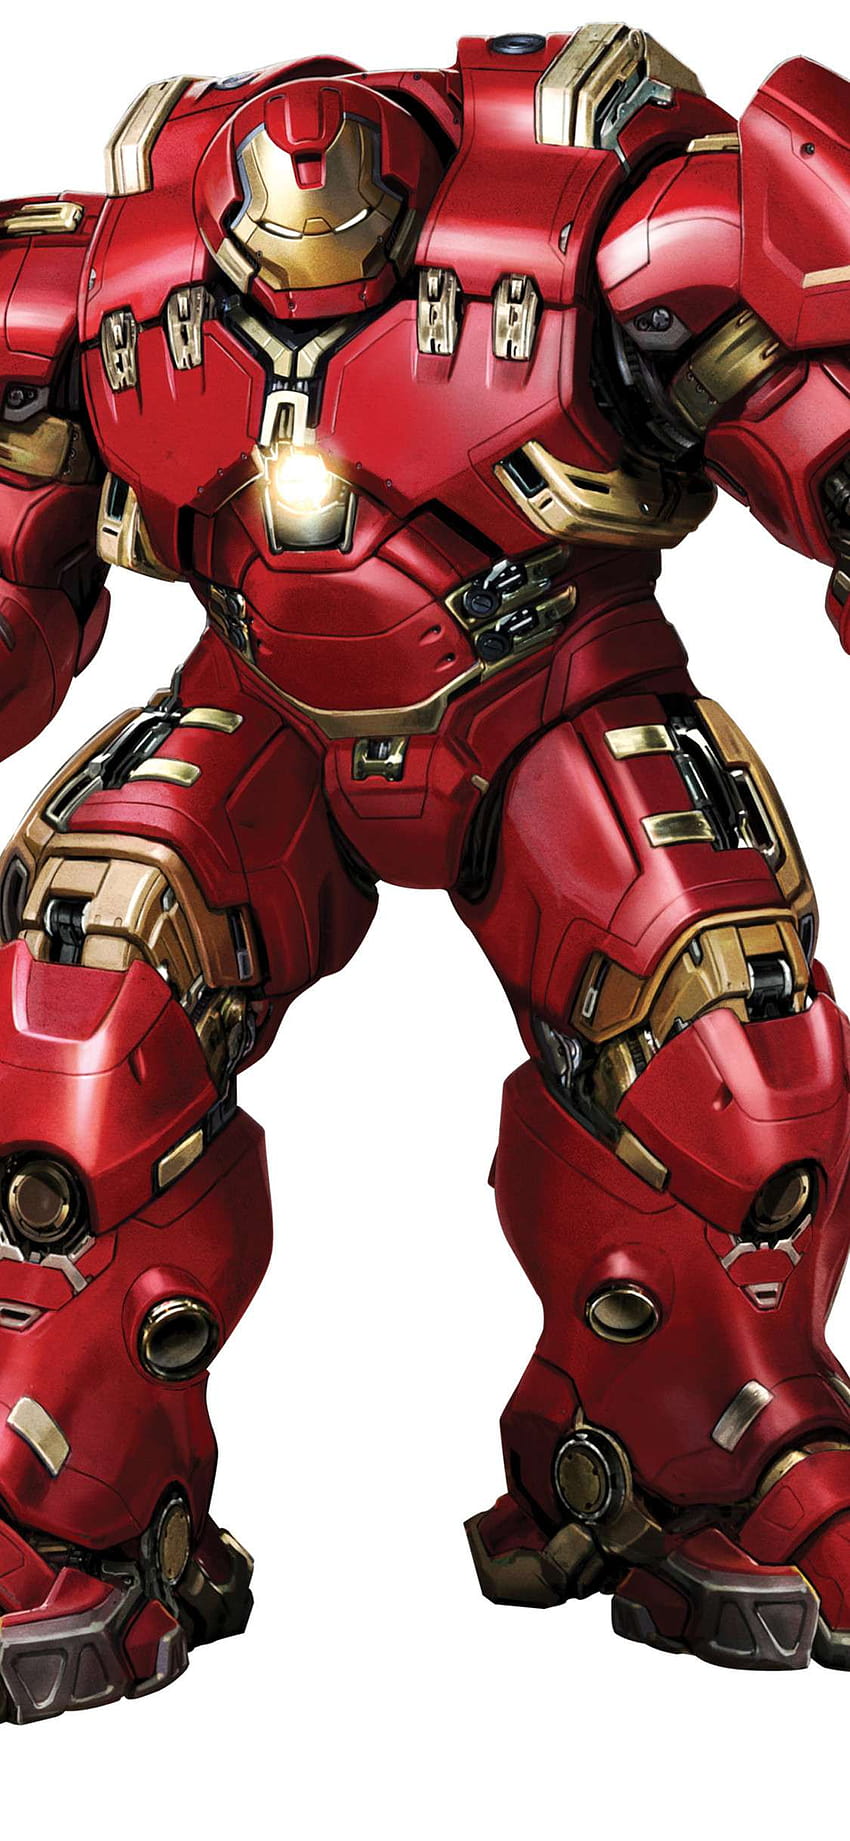 Increase your sales by 729% by building an Iron Man Hulkbuster Statue